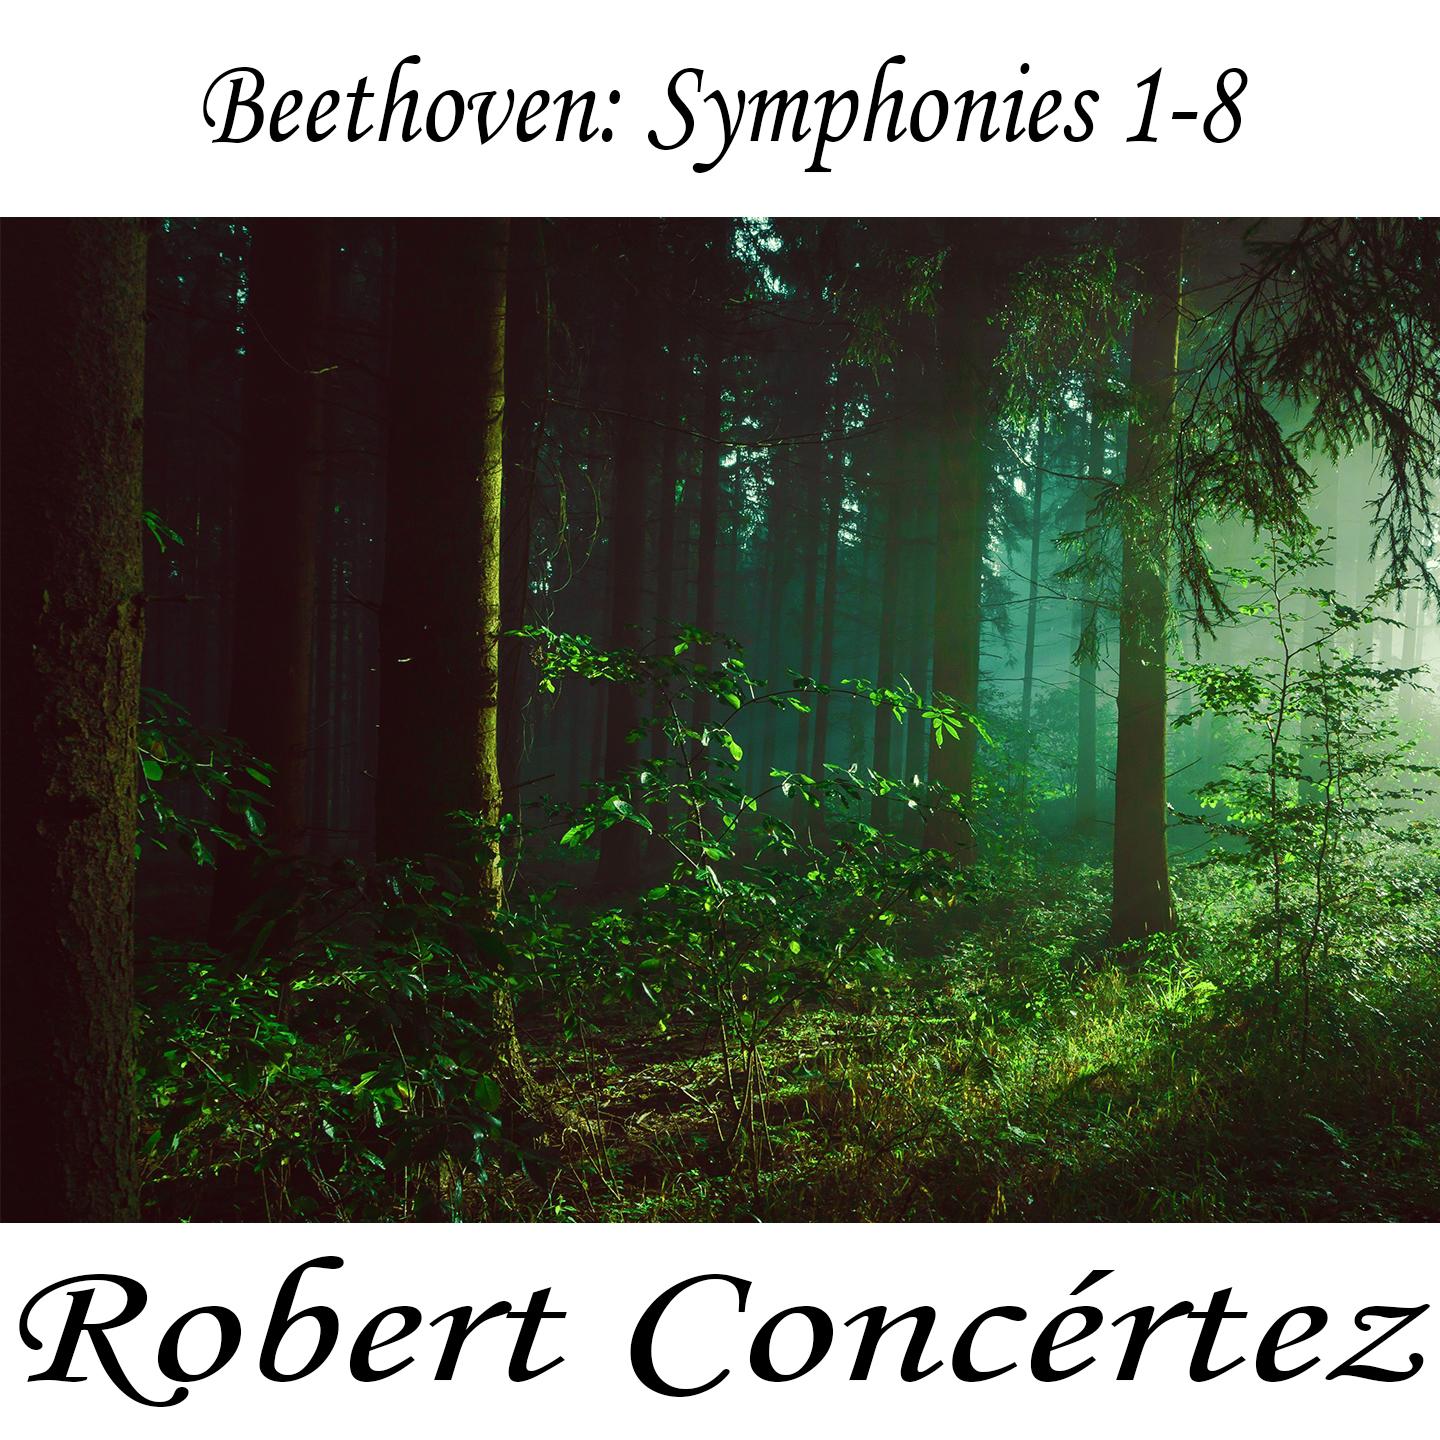 Beethoven: Symphony No- 6 in F Major, Op- 68 Pastorale V- Shepherds' Song, Cheerful and Thankful Feelings After the Storm- Allegretto